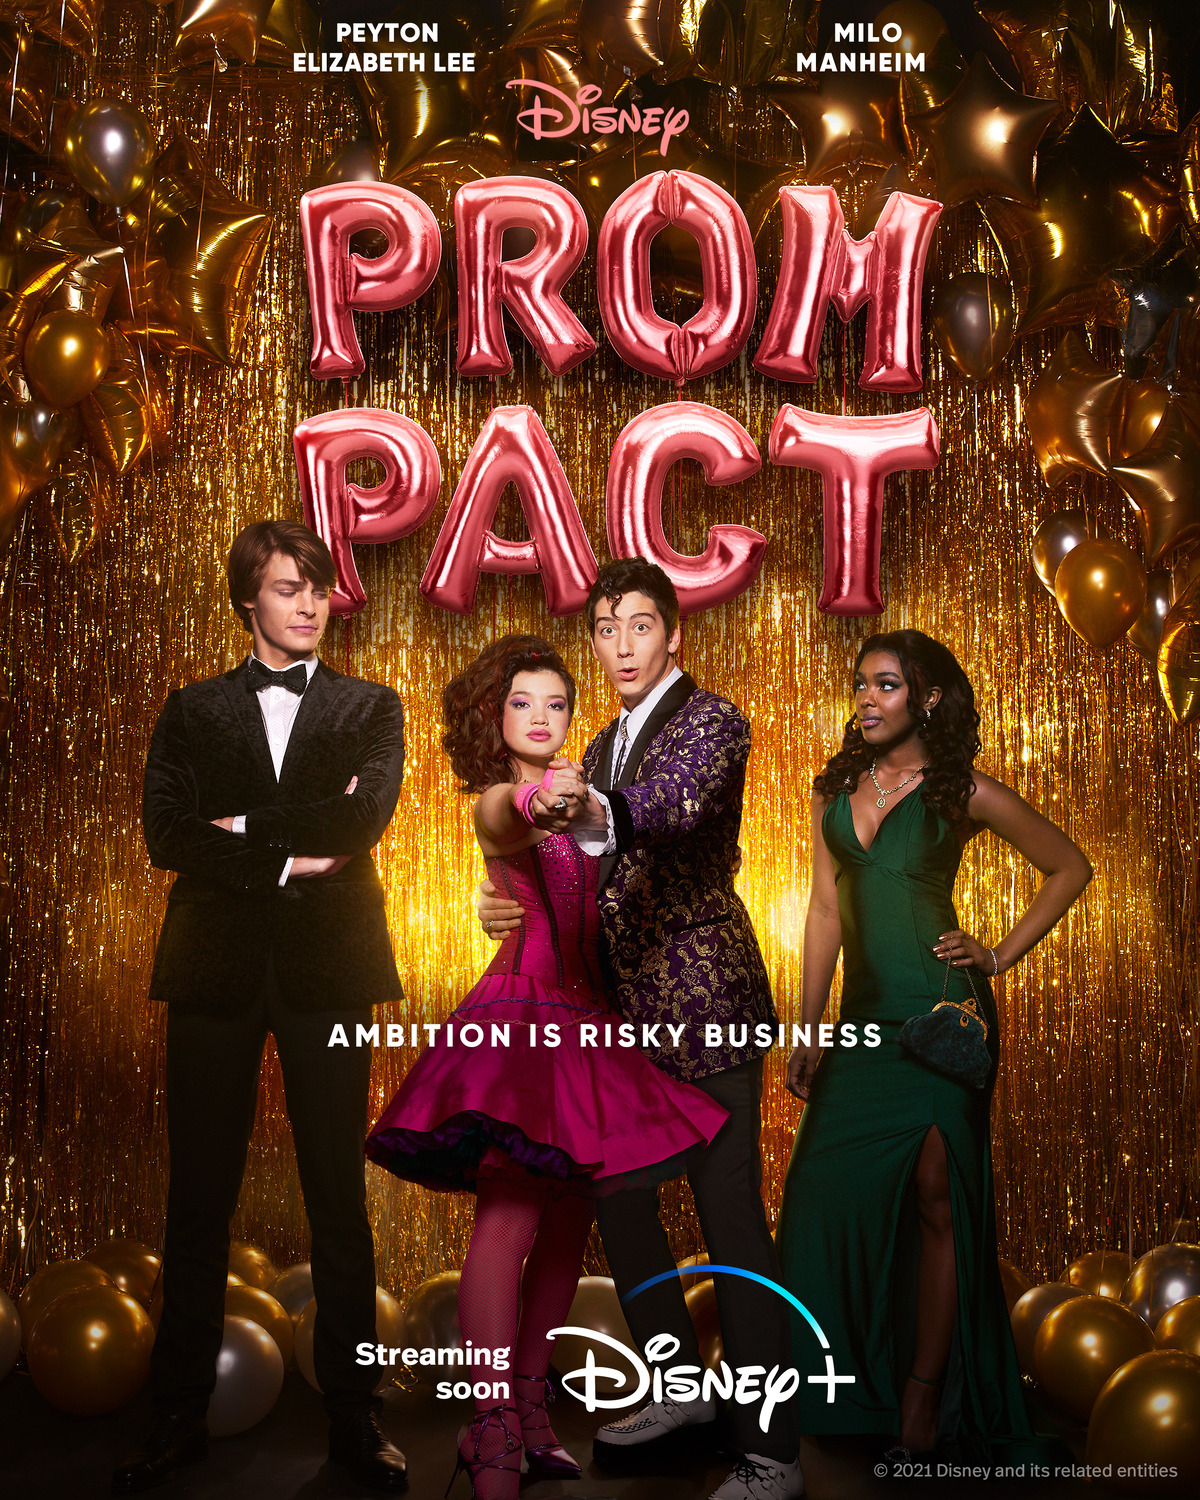 Extra Large Movie Poster Image for Prom Pact (#1 of 2)